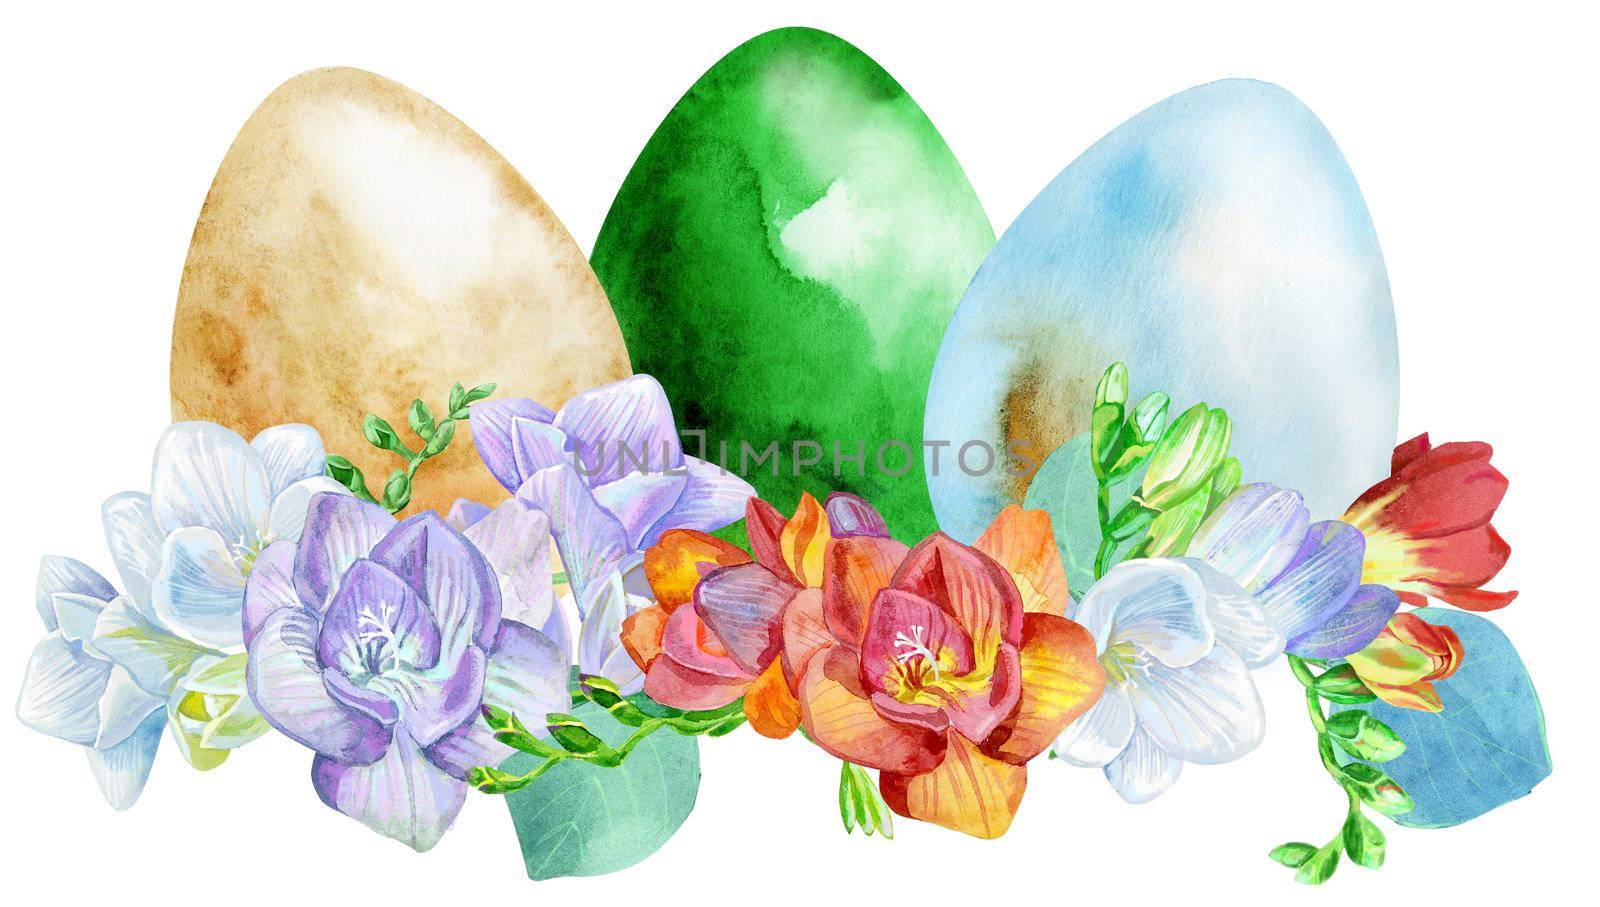 Watercolor Easter colored eggs with freesia and green grass on white background. Design element for greeting cards, note cards and invitations.